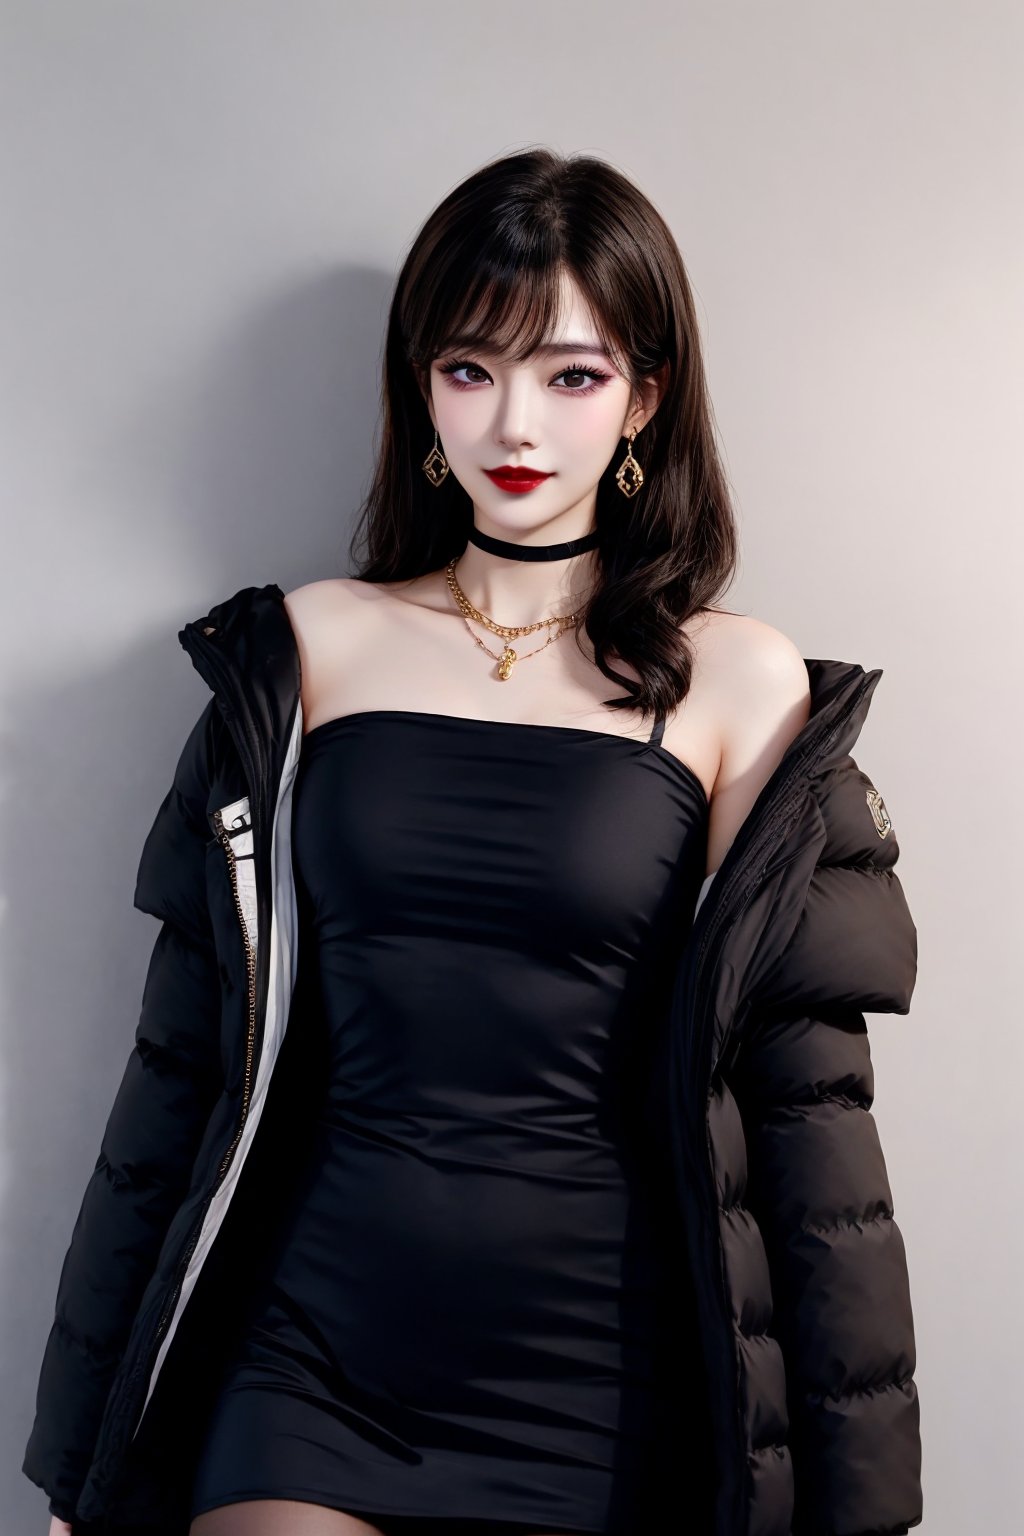 In a softly lit winter wonderland scene, a stunning Korean girl, Woman 1, stands out against the snowy backdrop. Her dreamy gaze, framed by luscious black hair with subtle bangs, is accentuated by big, bright smile and slightly upturned lips, painted with dark red lipstick. Her pale skin and delicate facial features are rendered in ultra-fine detail, showcasing perfect anatomy. A beautiful necklace and small earrings adorn her neck, while a handbag and winter down parka add a touch of elegance to her outfit. The overall effect is one of extreme delicacy, beauty, and realism, as if captured from an 8K art photo.,uniform11